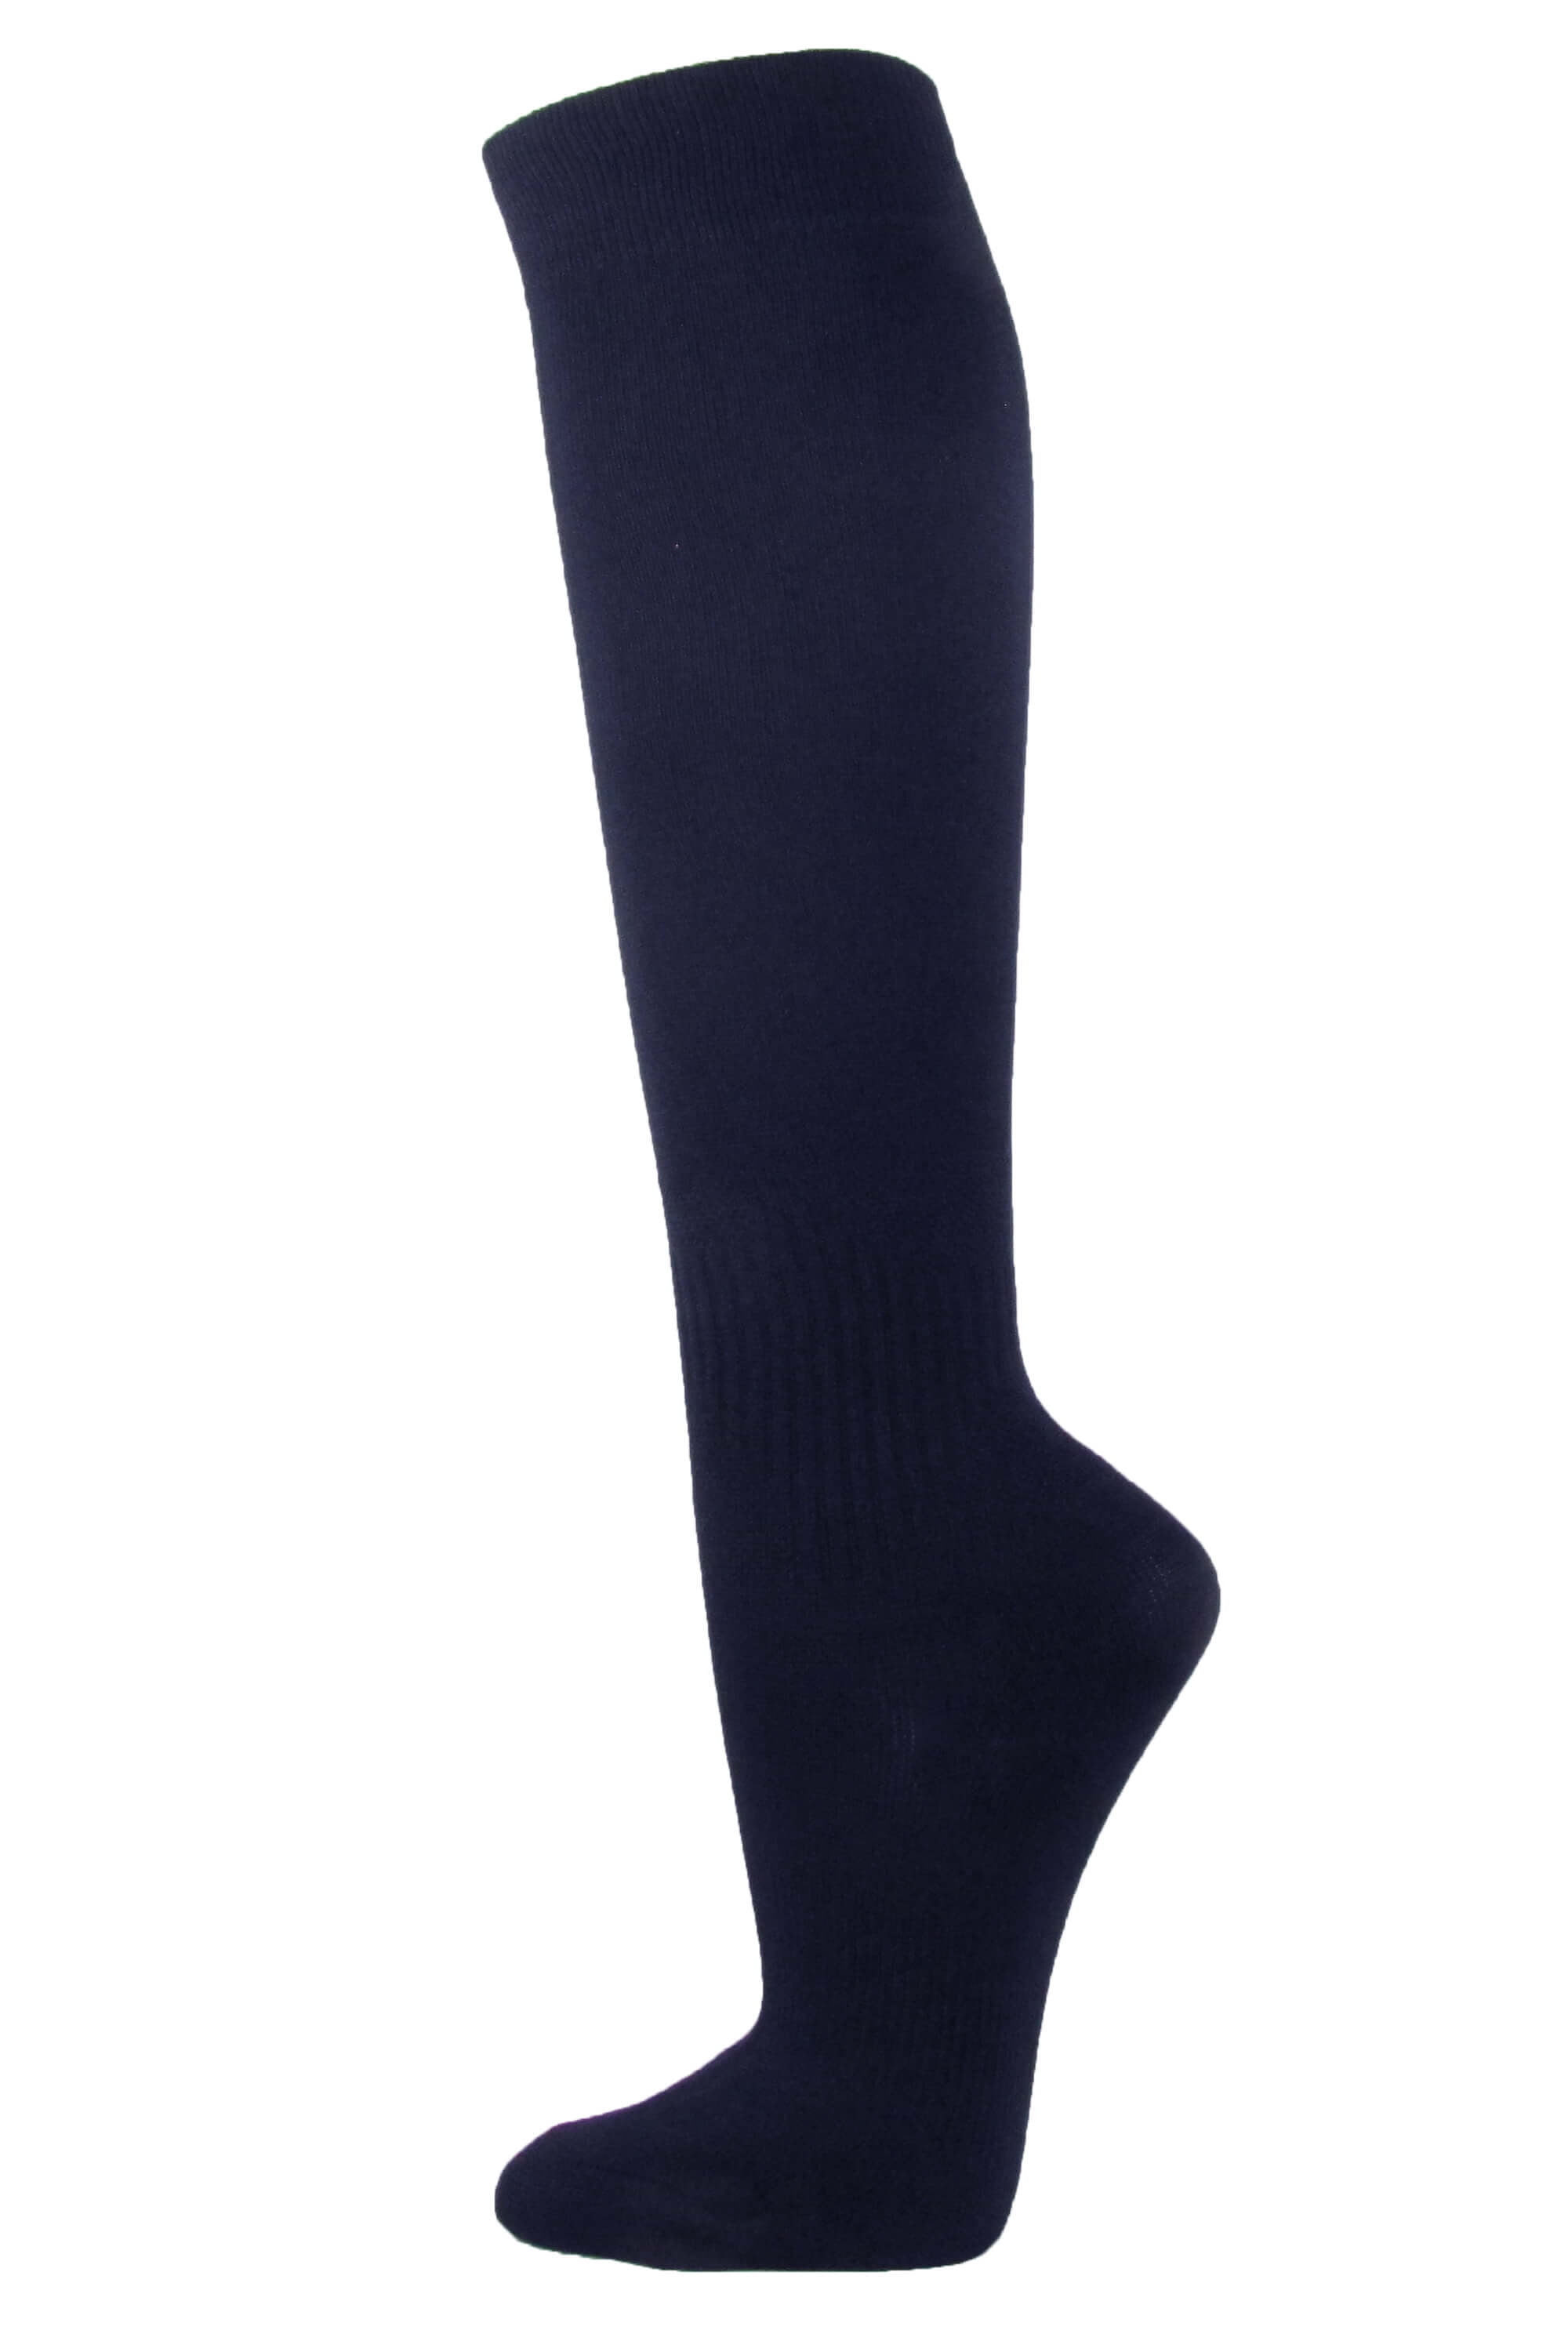 Details about   Franklin Sports Youth Baseball Socks Navy Youth Small Shoe Size 10-1 NEW 